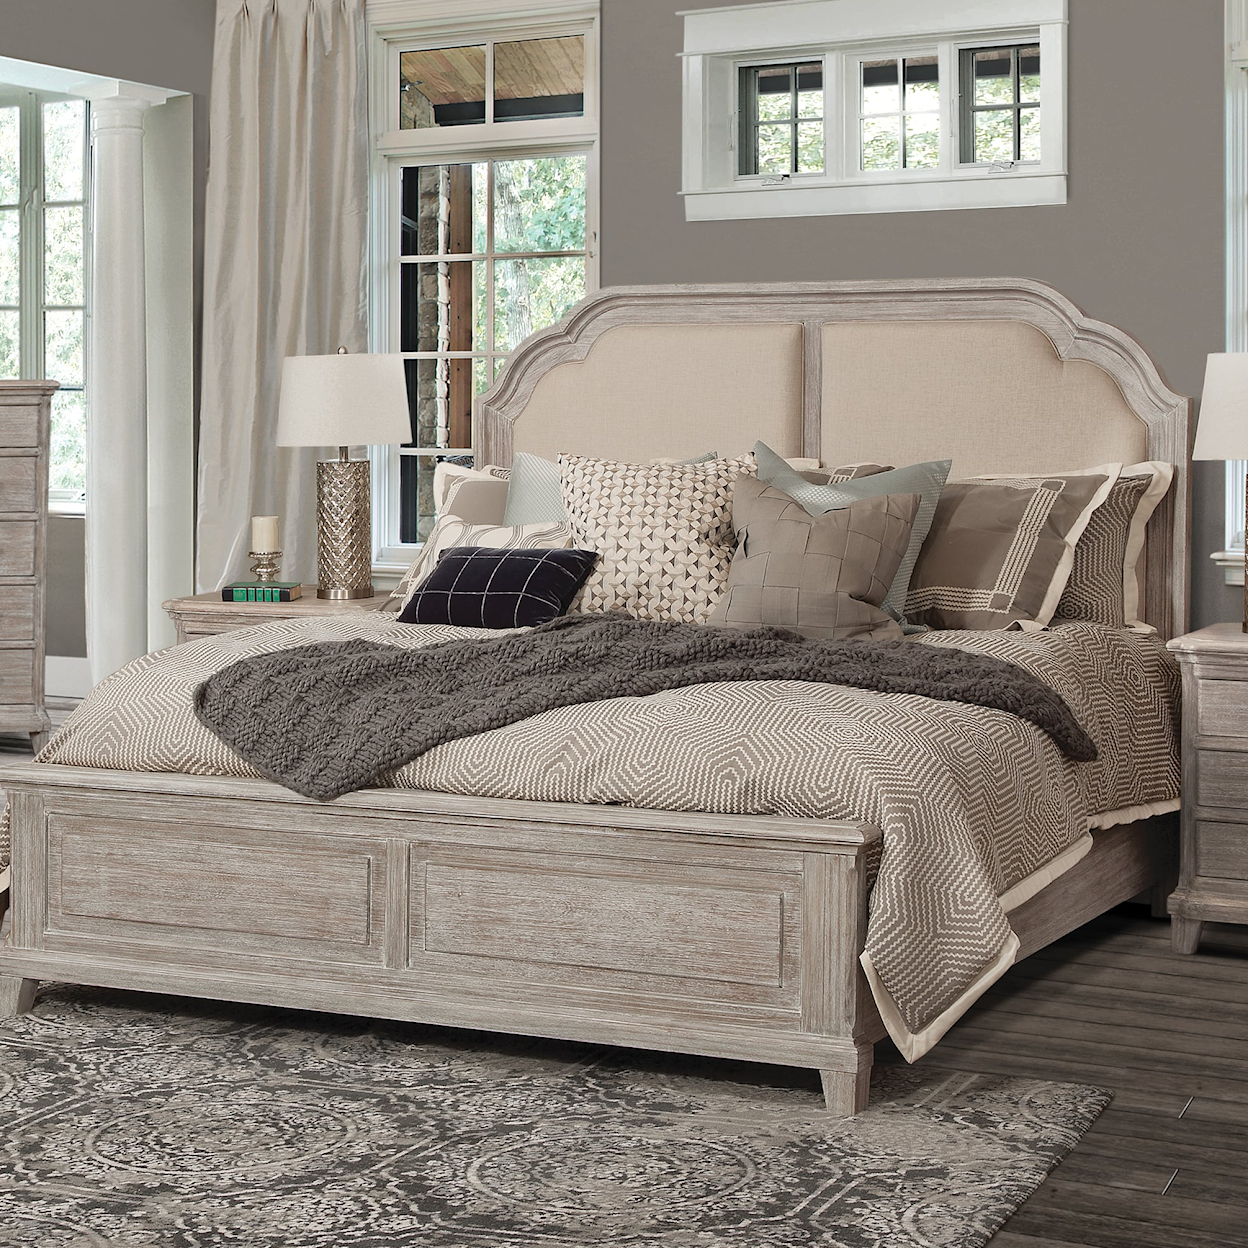 American Woodcrafters Painters Creek Upholstered Queen Bed